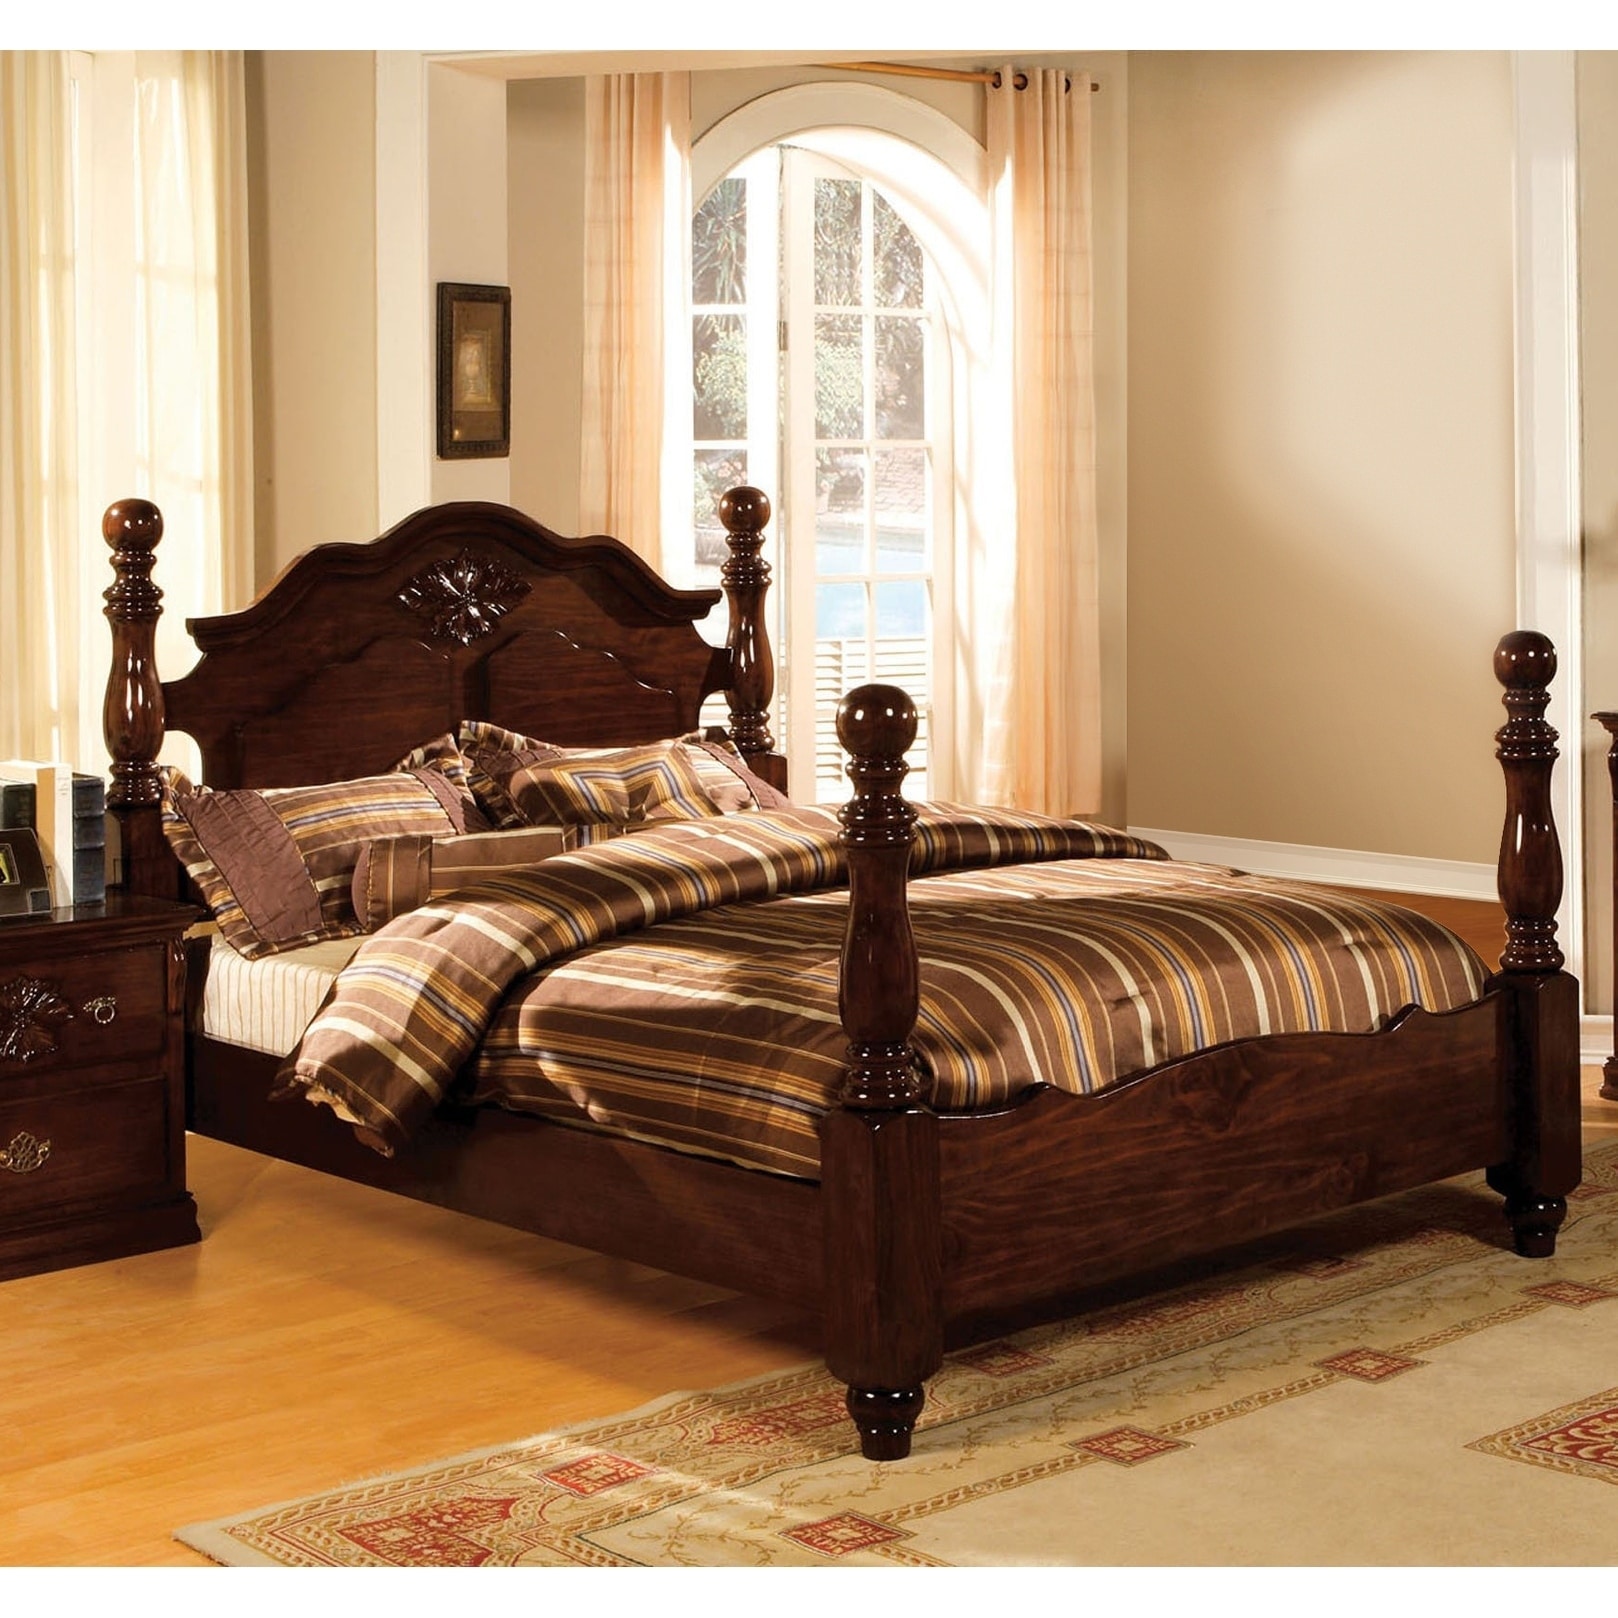 Furniture of America Weston Pine Poster Bed - On Sale - Bed Bath Beyond - 9218879